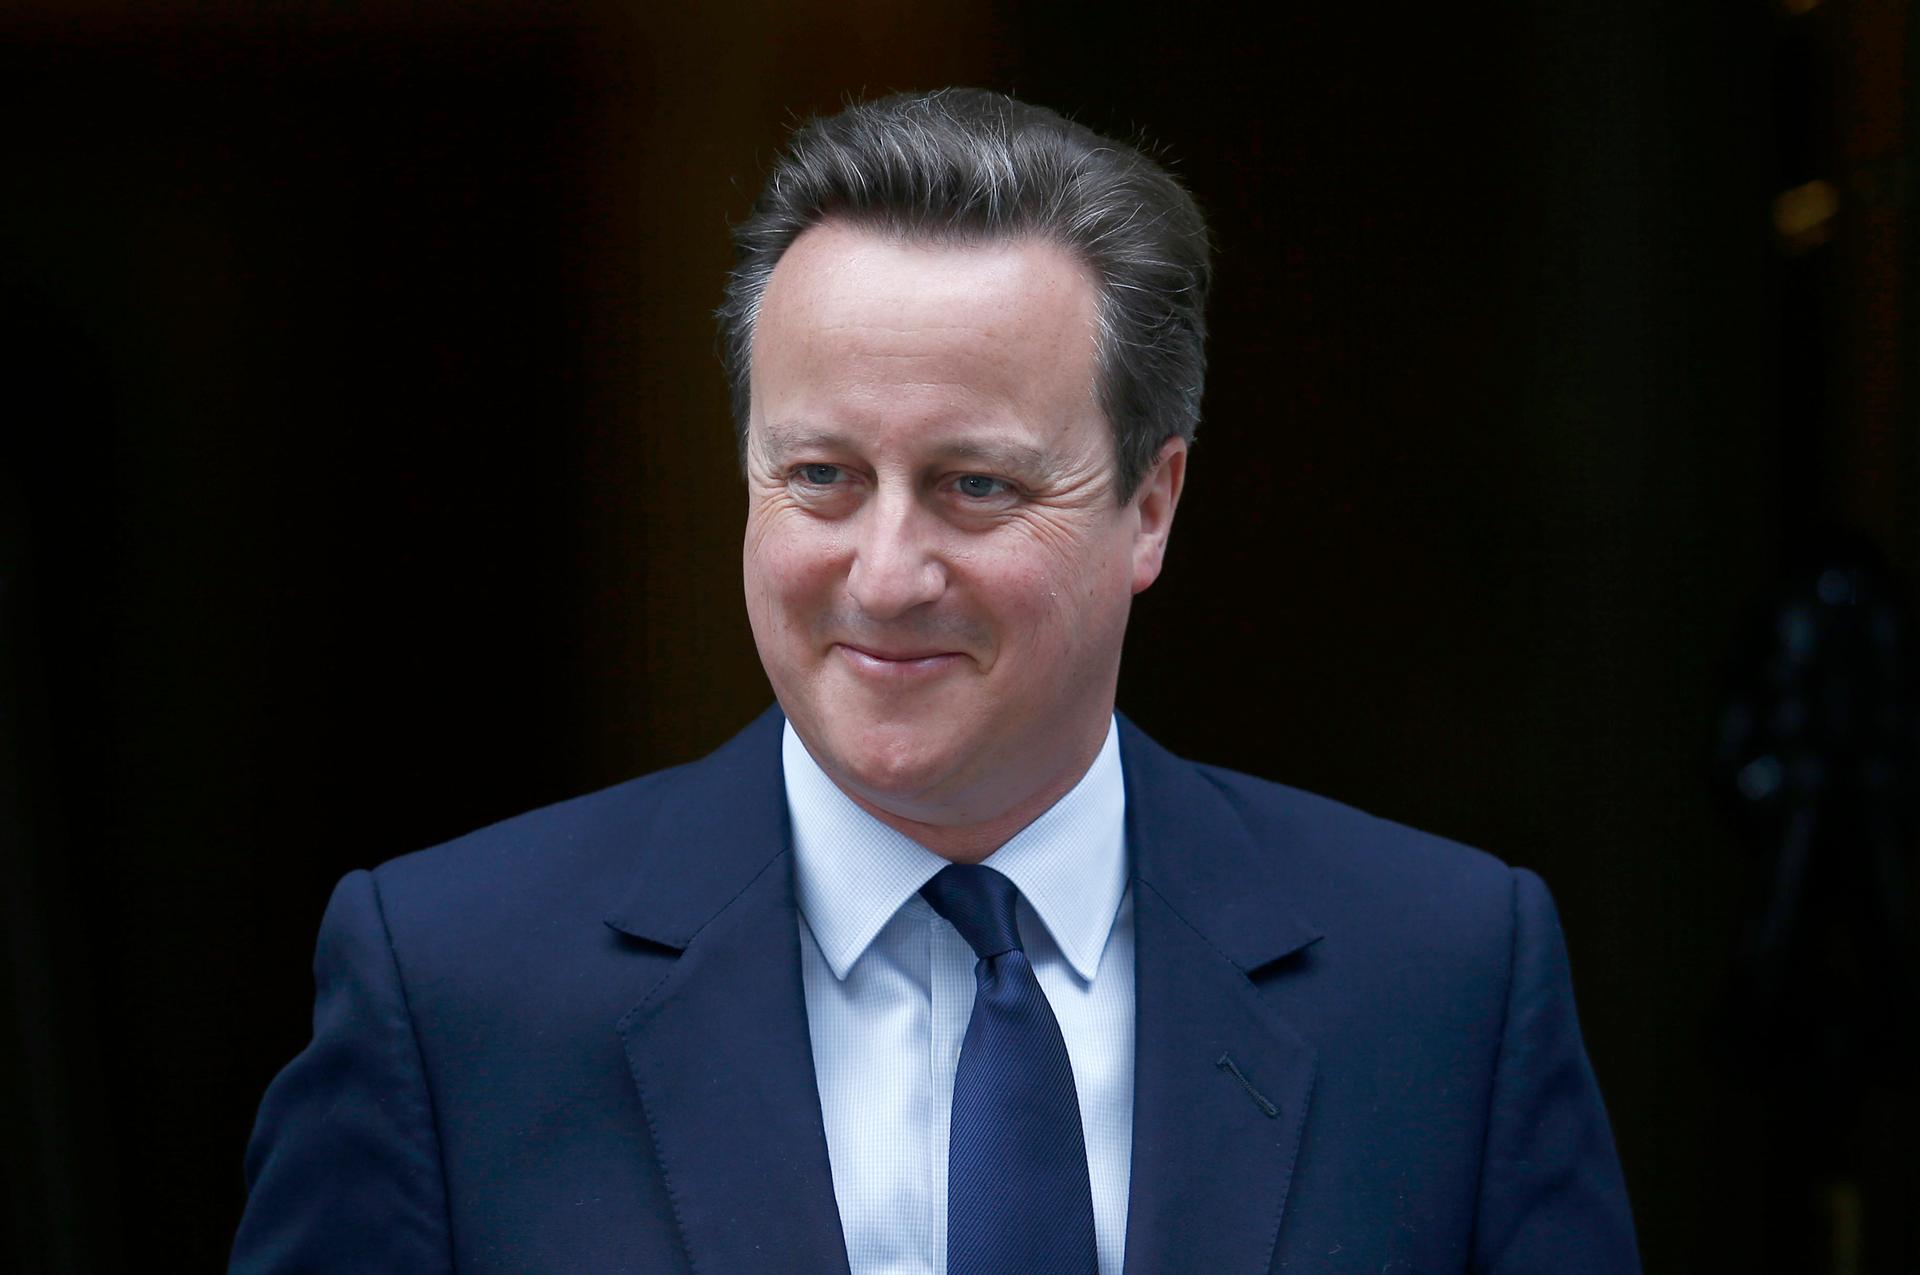 Britain's Prime Minister, David Cameron, putting on a brave face as he heads for the House of Commons, in London, Monday